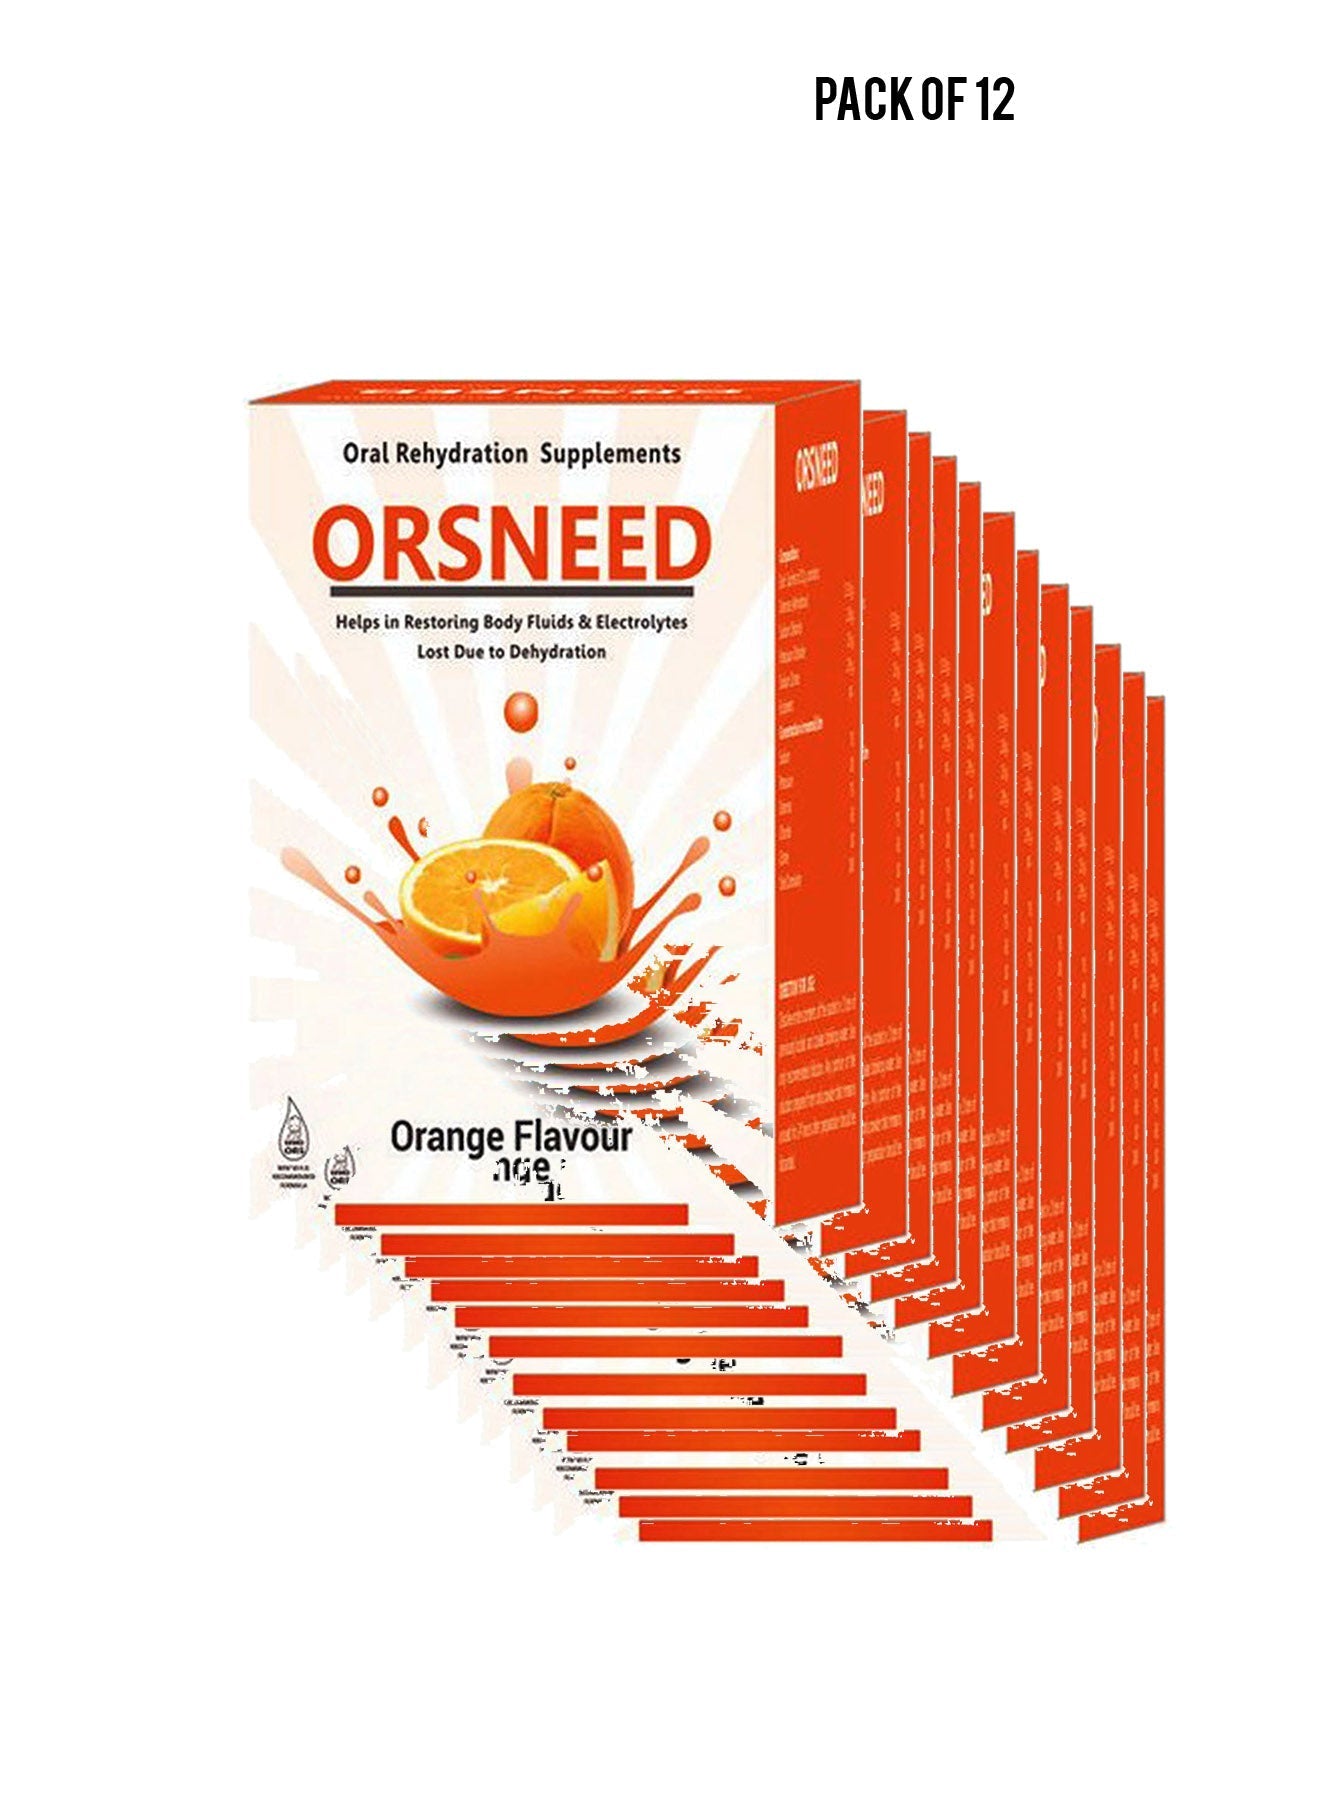 ORSNEED Oral Rehydration Supplements Orange Flavor 10x42g Value Pack of 12 